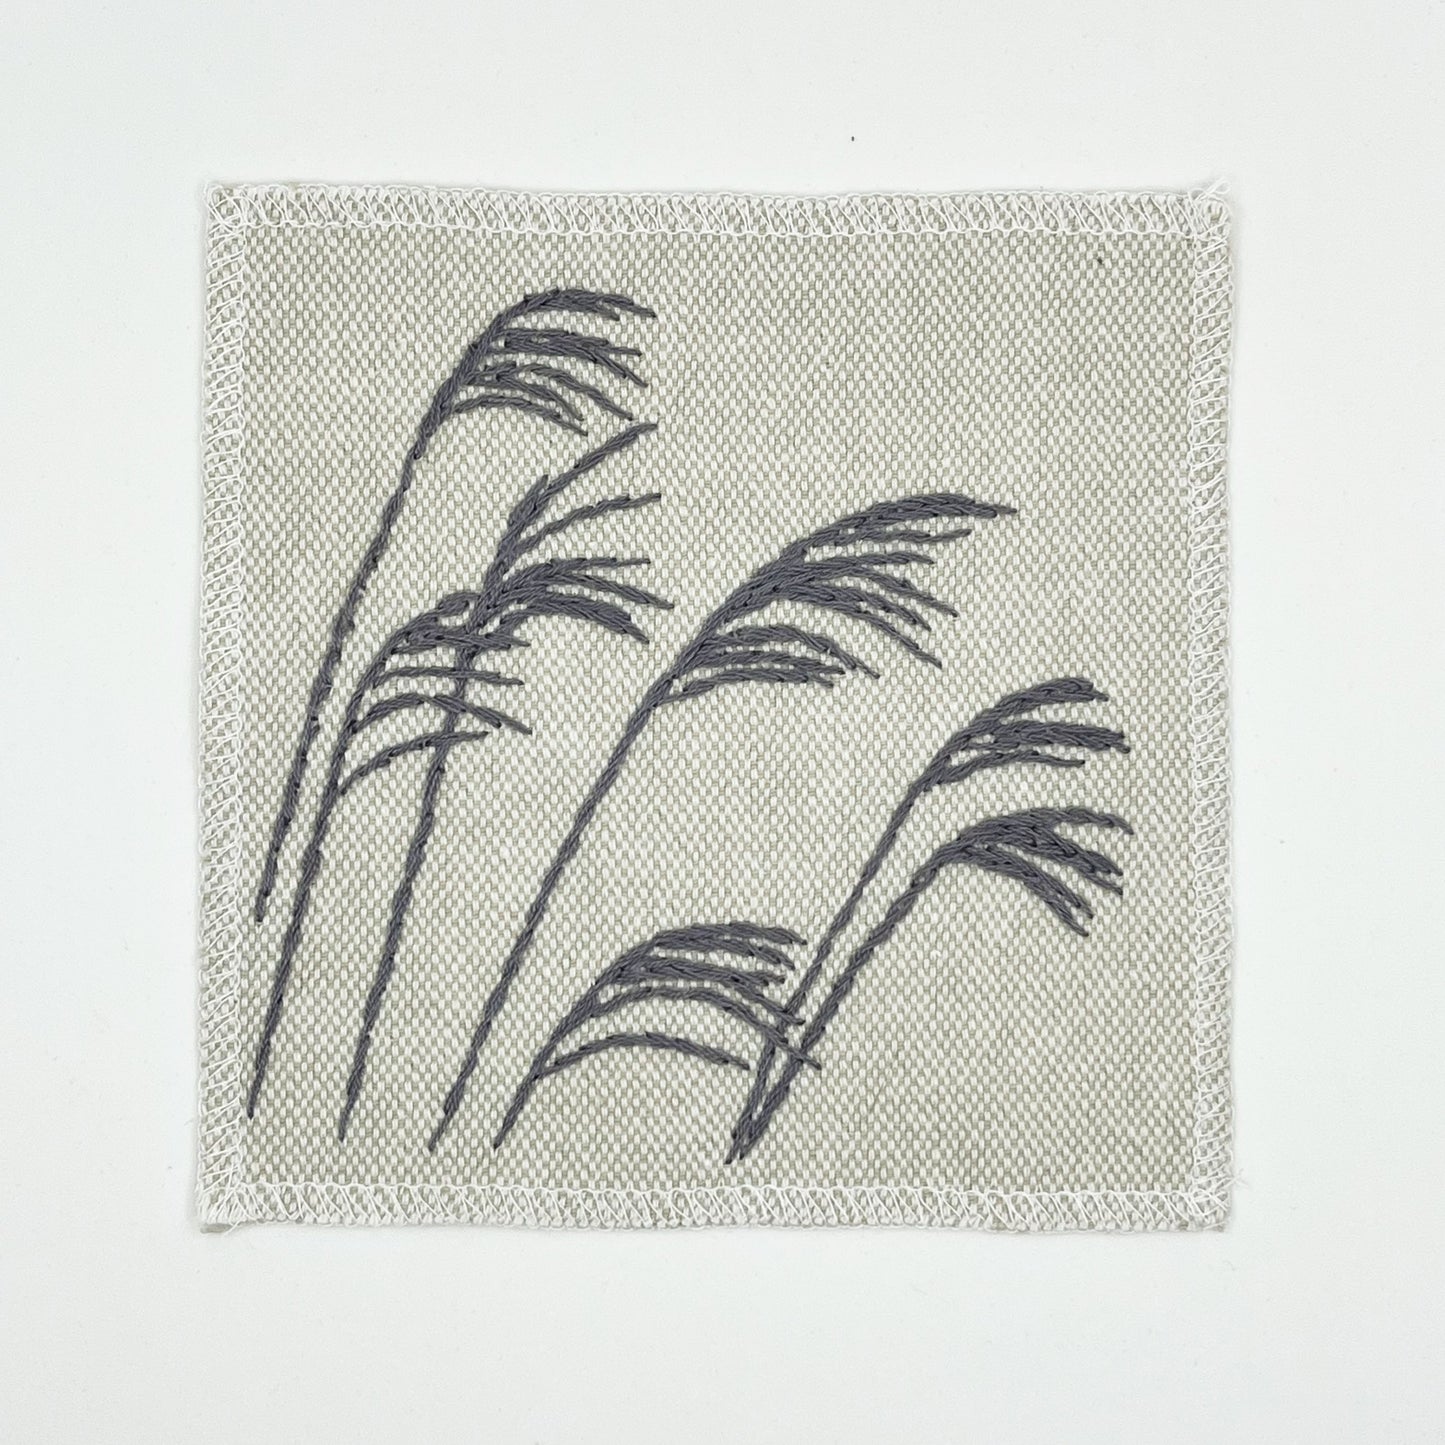 a cream colored square patch with stalks of wild grass stitched in grey thread with a stem stitch, on a white background